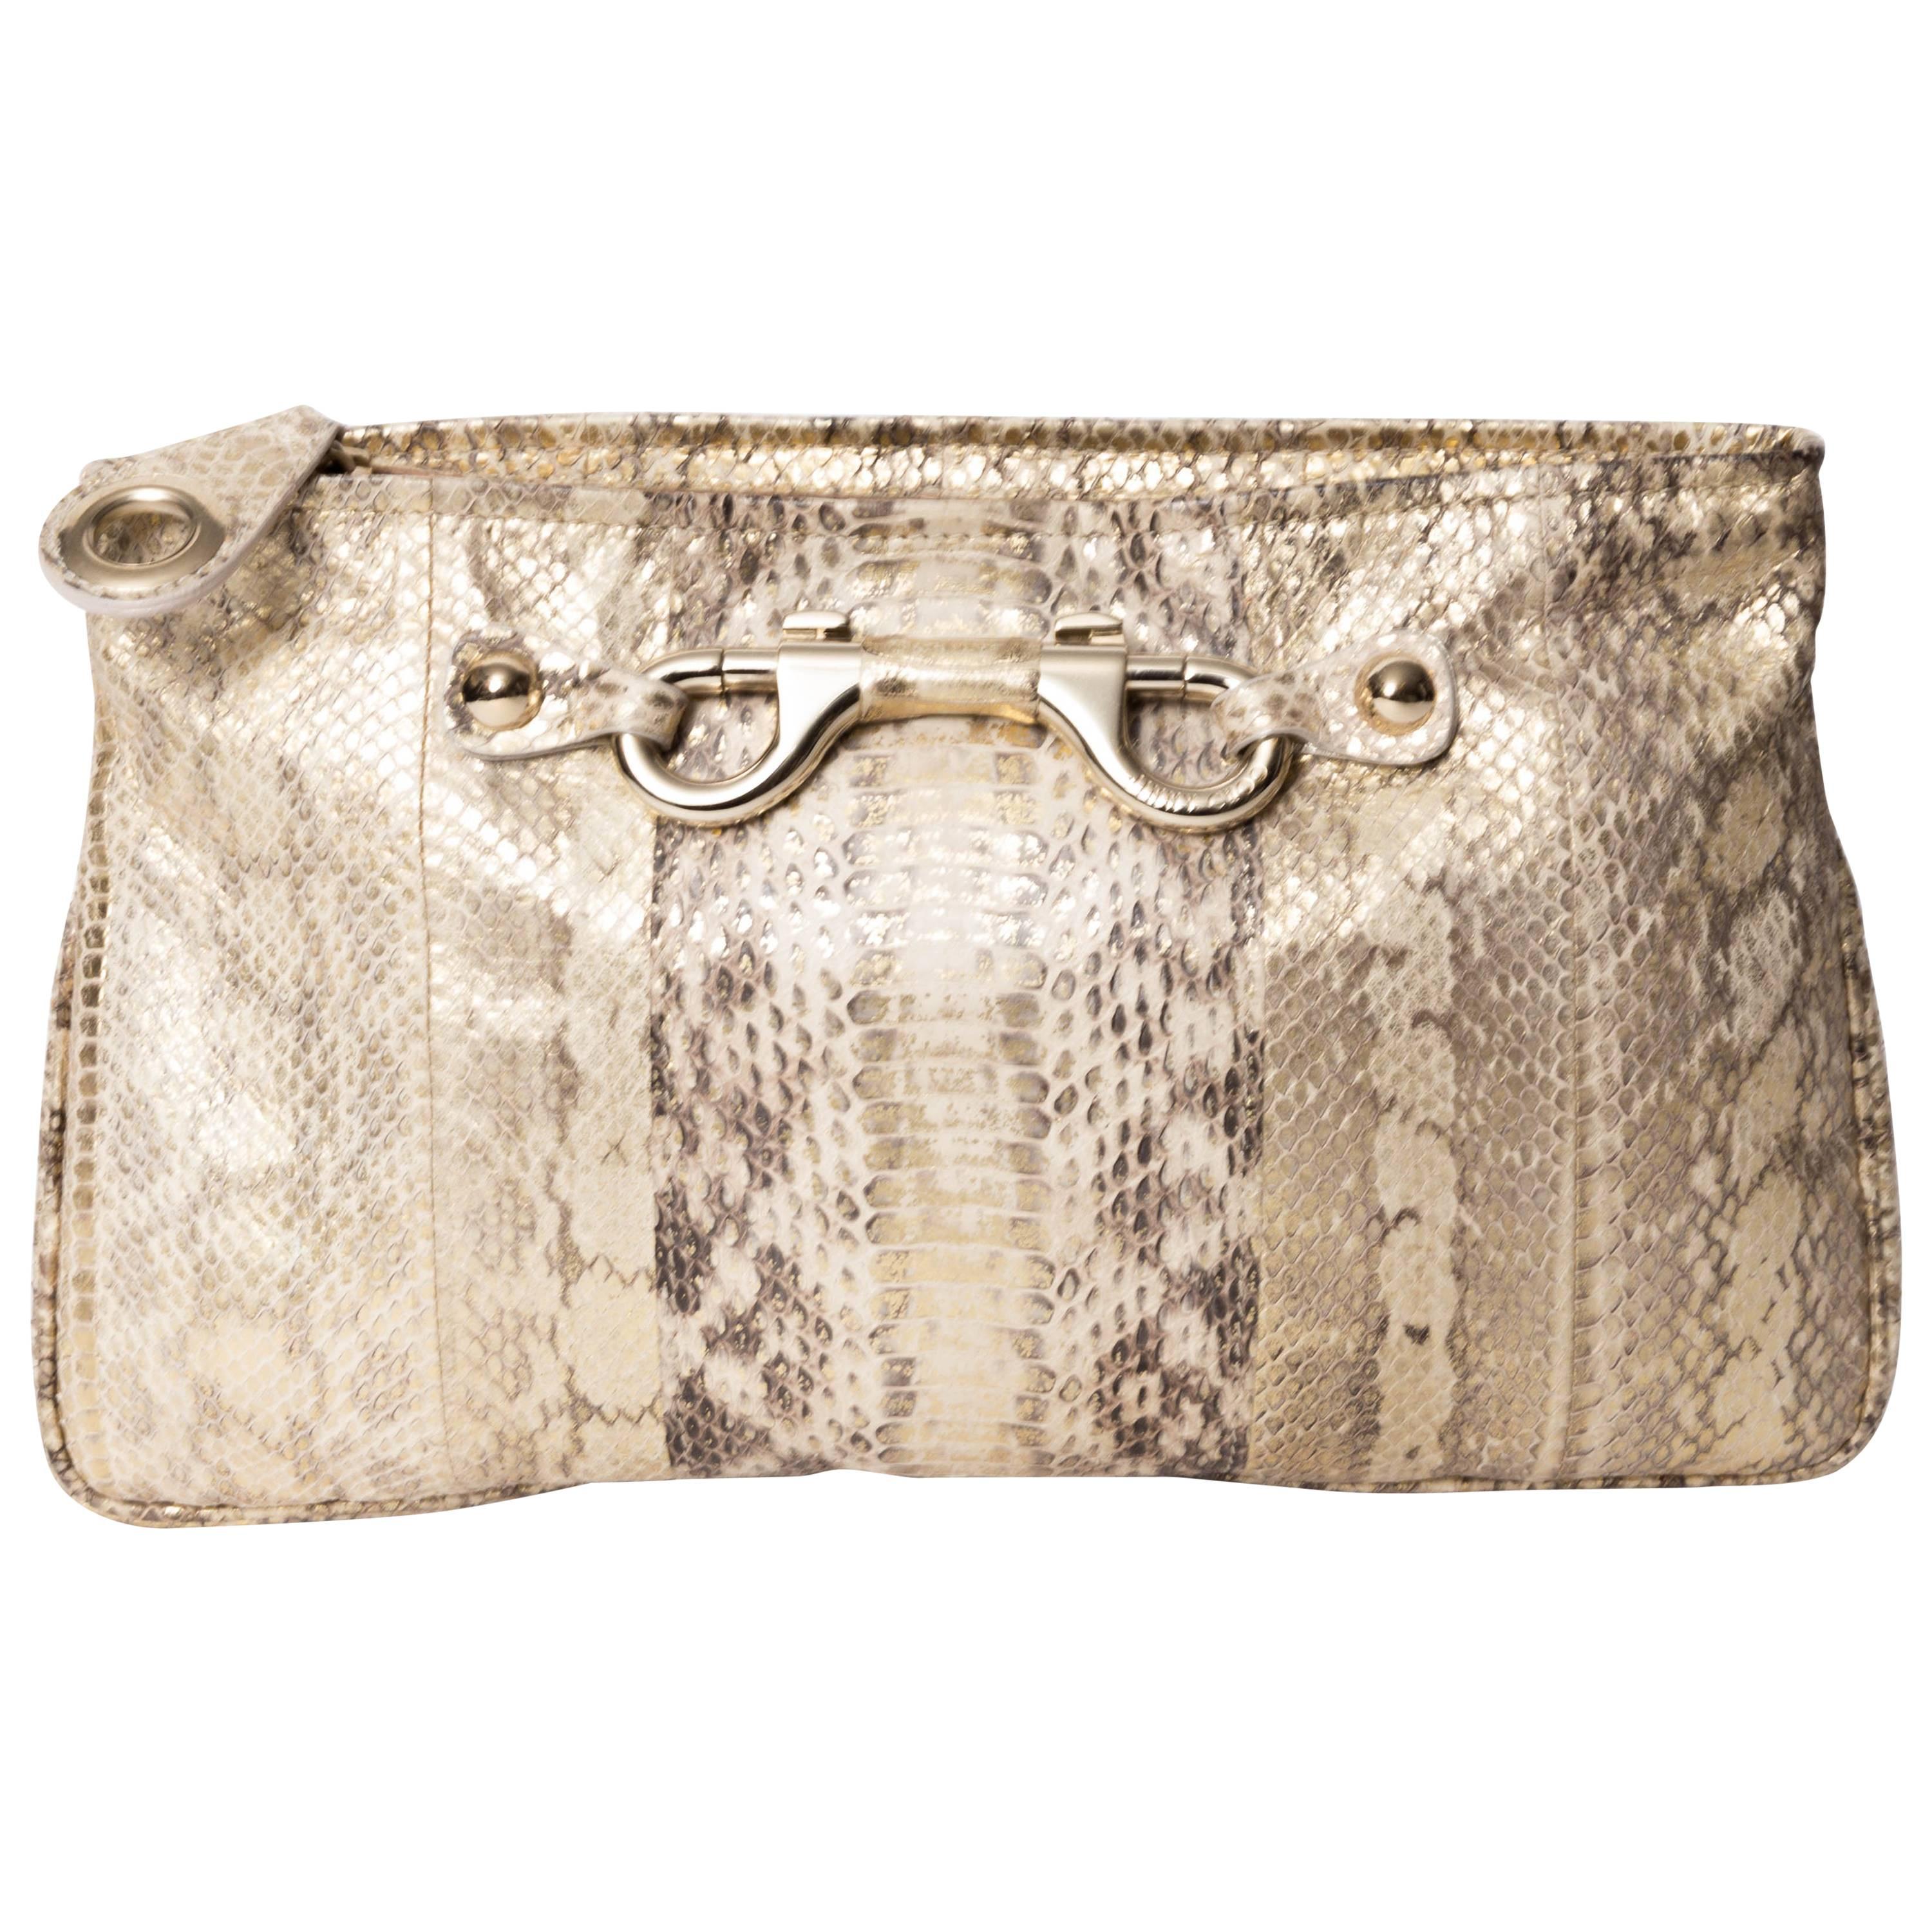 Jimmy Choo Gold and Tan Snakeskin Clutch with Horsebit Accents